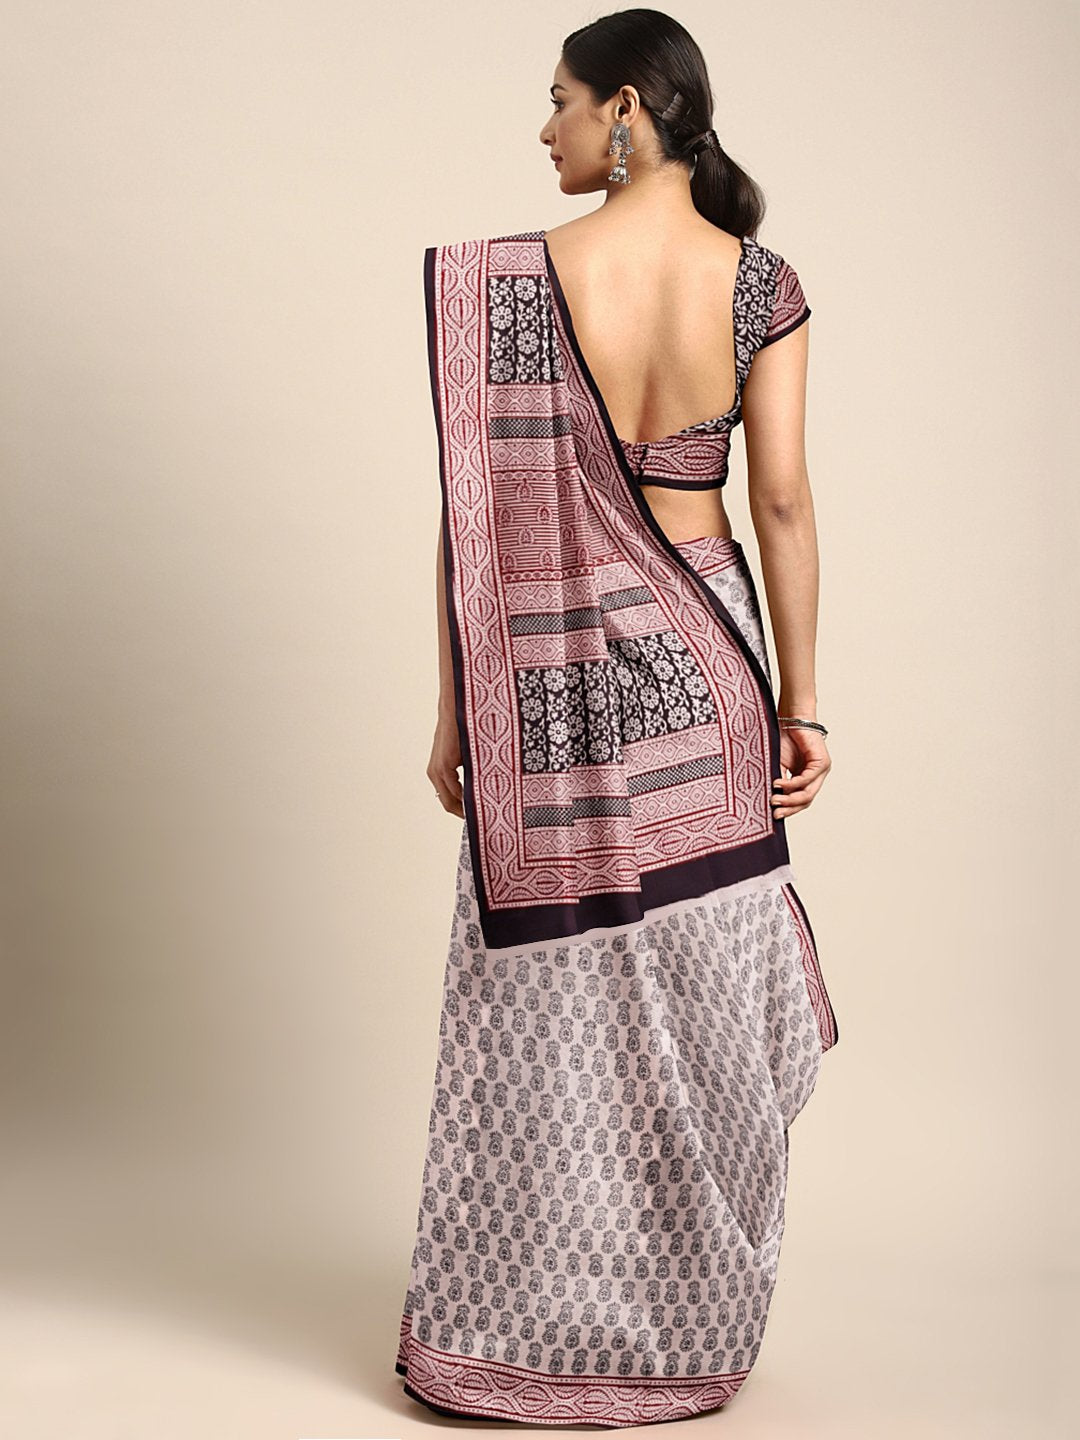 Off-White Black Handblock Print Bagh Saree-Saree-Kalakari India-MRBASA0016-Bagh, Cotton, Geographical Indication, Hand Blocks, Hand Crafted, Heritage Prints, Natural Dyes, Sarees, Sustainable Fabrics-[Linen,Ethnic,wear,Fashionista,Handloom,Handicraft,Indigo,blockprint,block,print,Cotton,Chanderi,Blue, latest,classy,party,bollywood,trendy,summer,style,traditional,formal,elegant,unique,style,hand,block,print, dabu,booti,gift,present,glamorous,affordable,collectible,Sari,Saree,printed, holi, Diwali